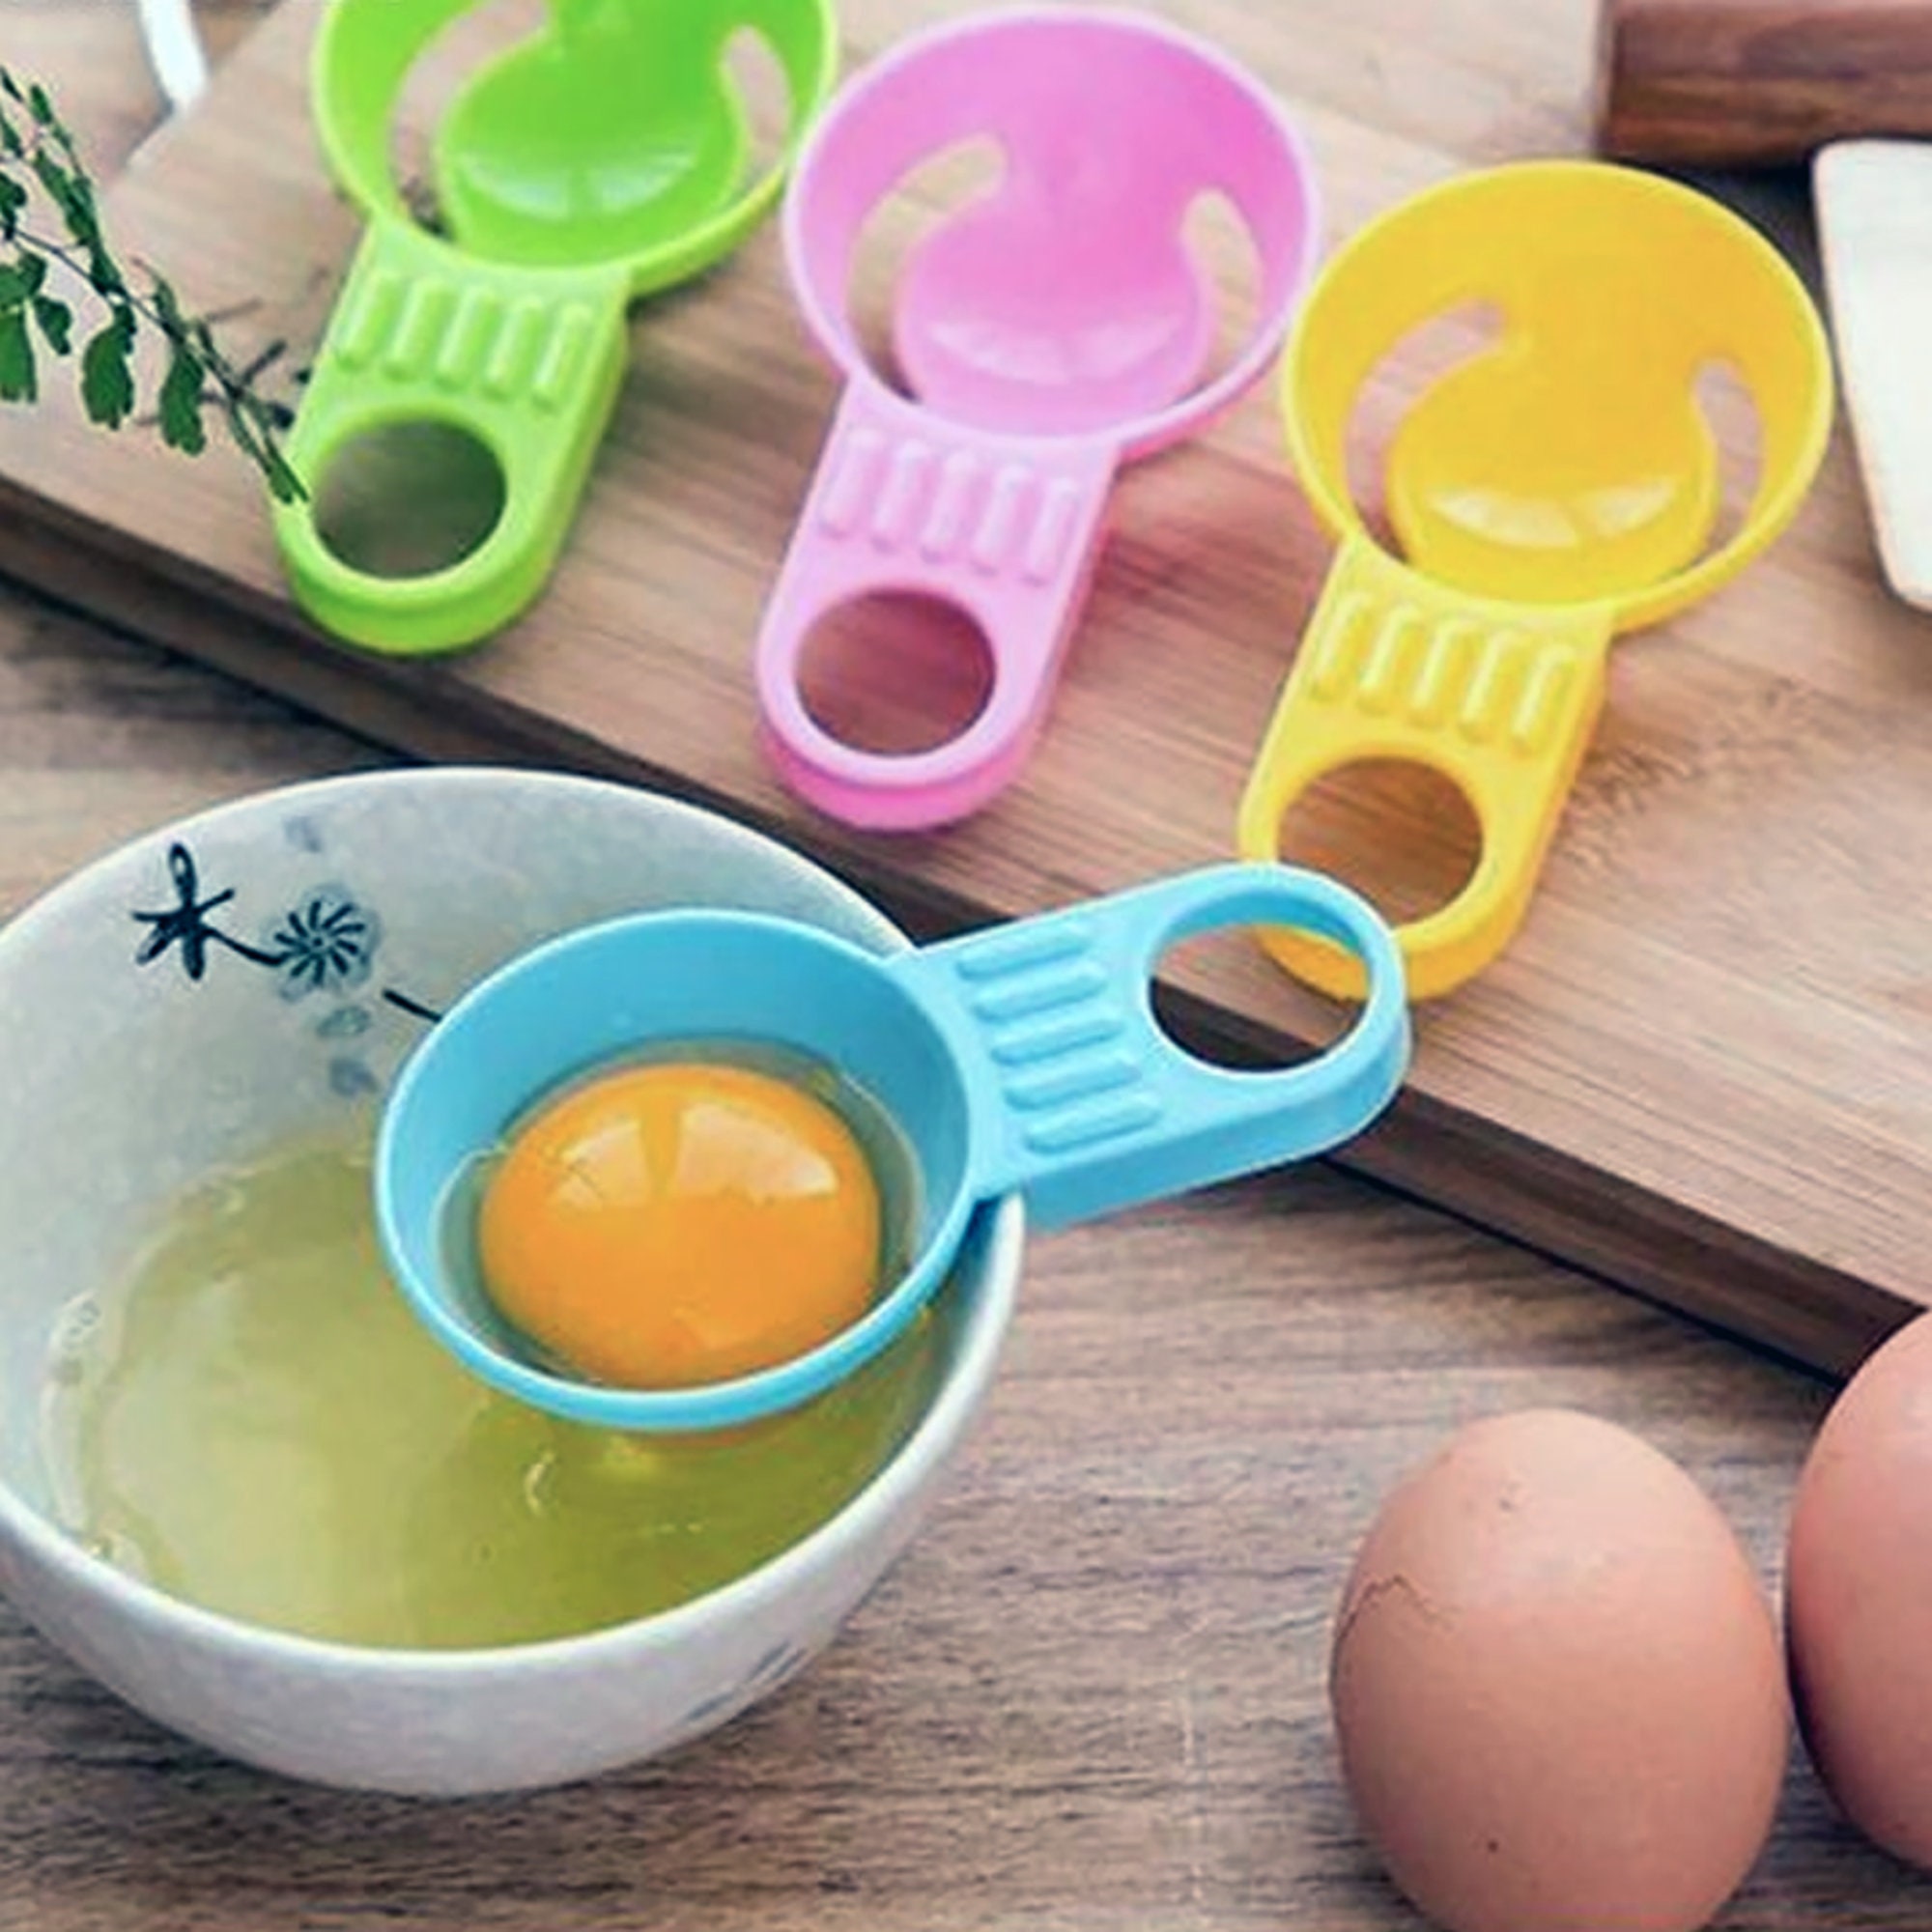 Egg Separator Mini Egg White and Yolk Funny Kitchen Gadget, Ceramic Cute  Cartoon Smiley Face, Filter, Creative Household Cooking & Baking Tool